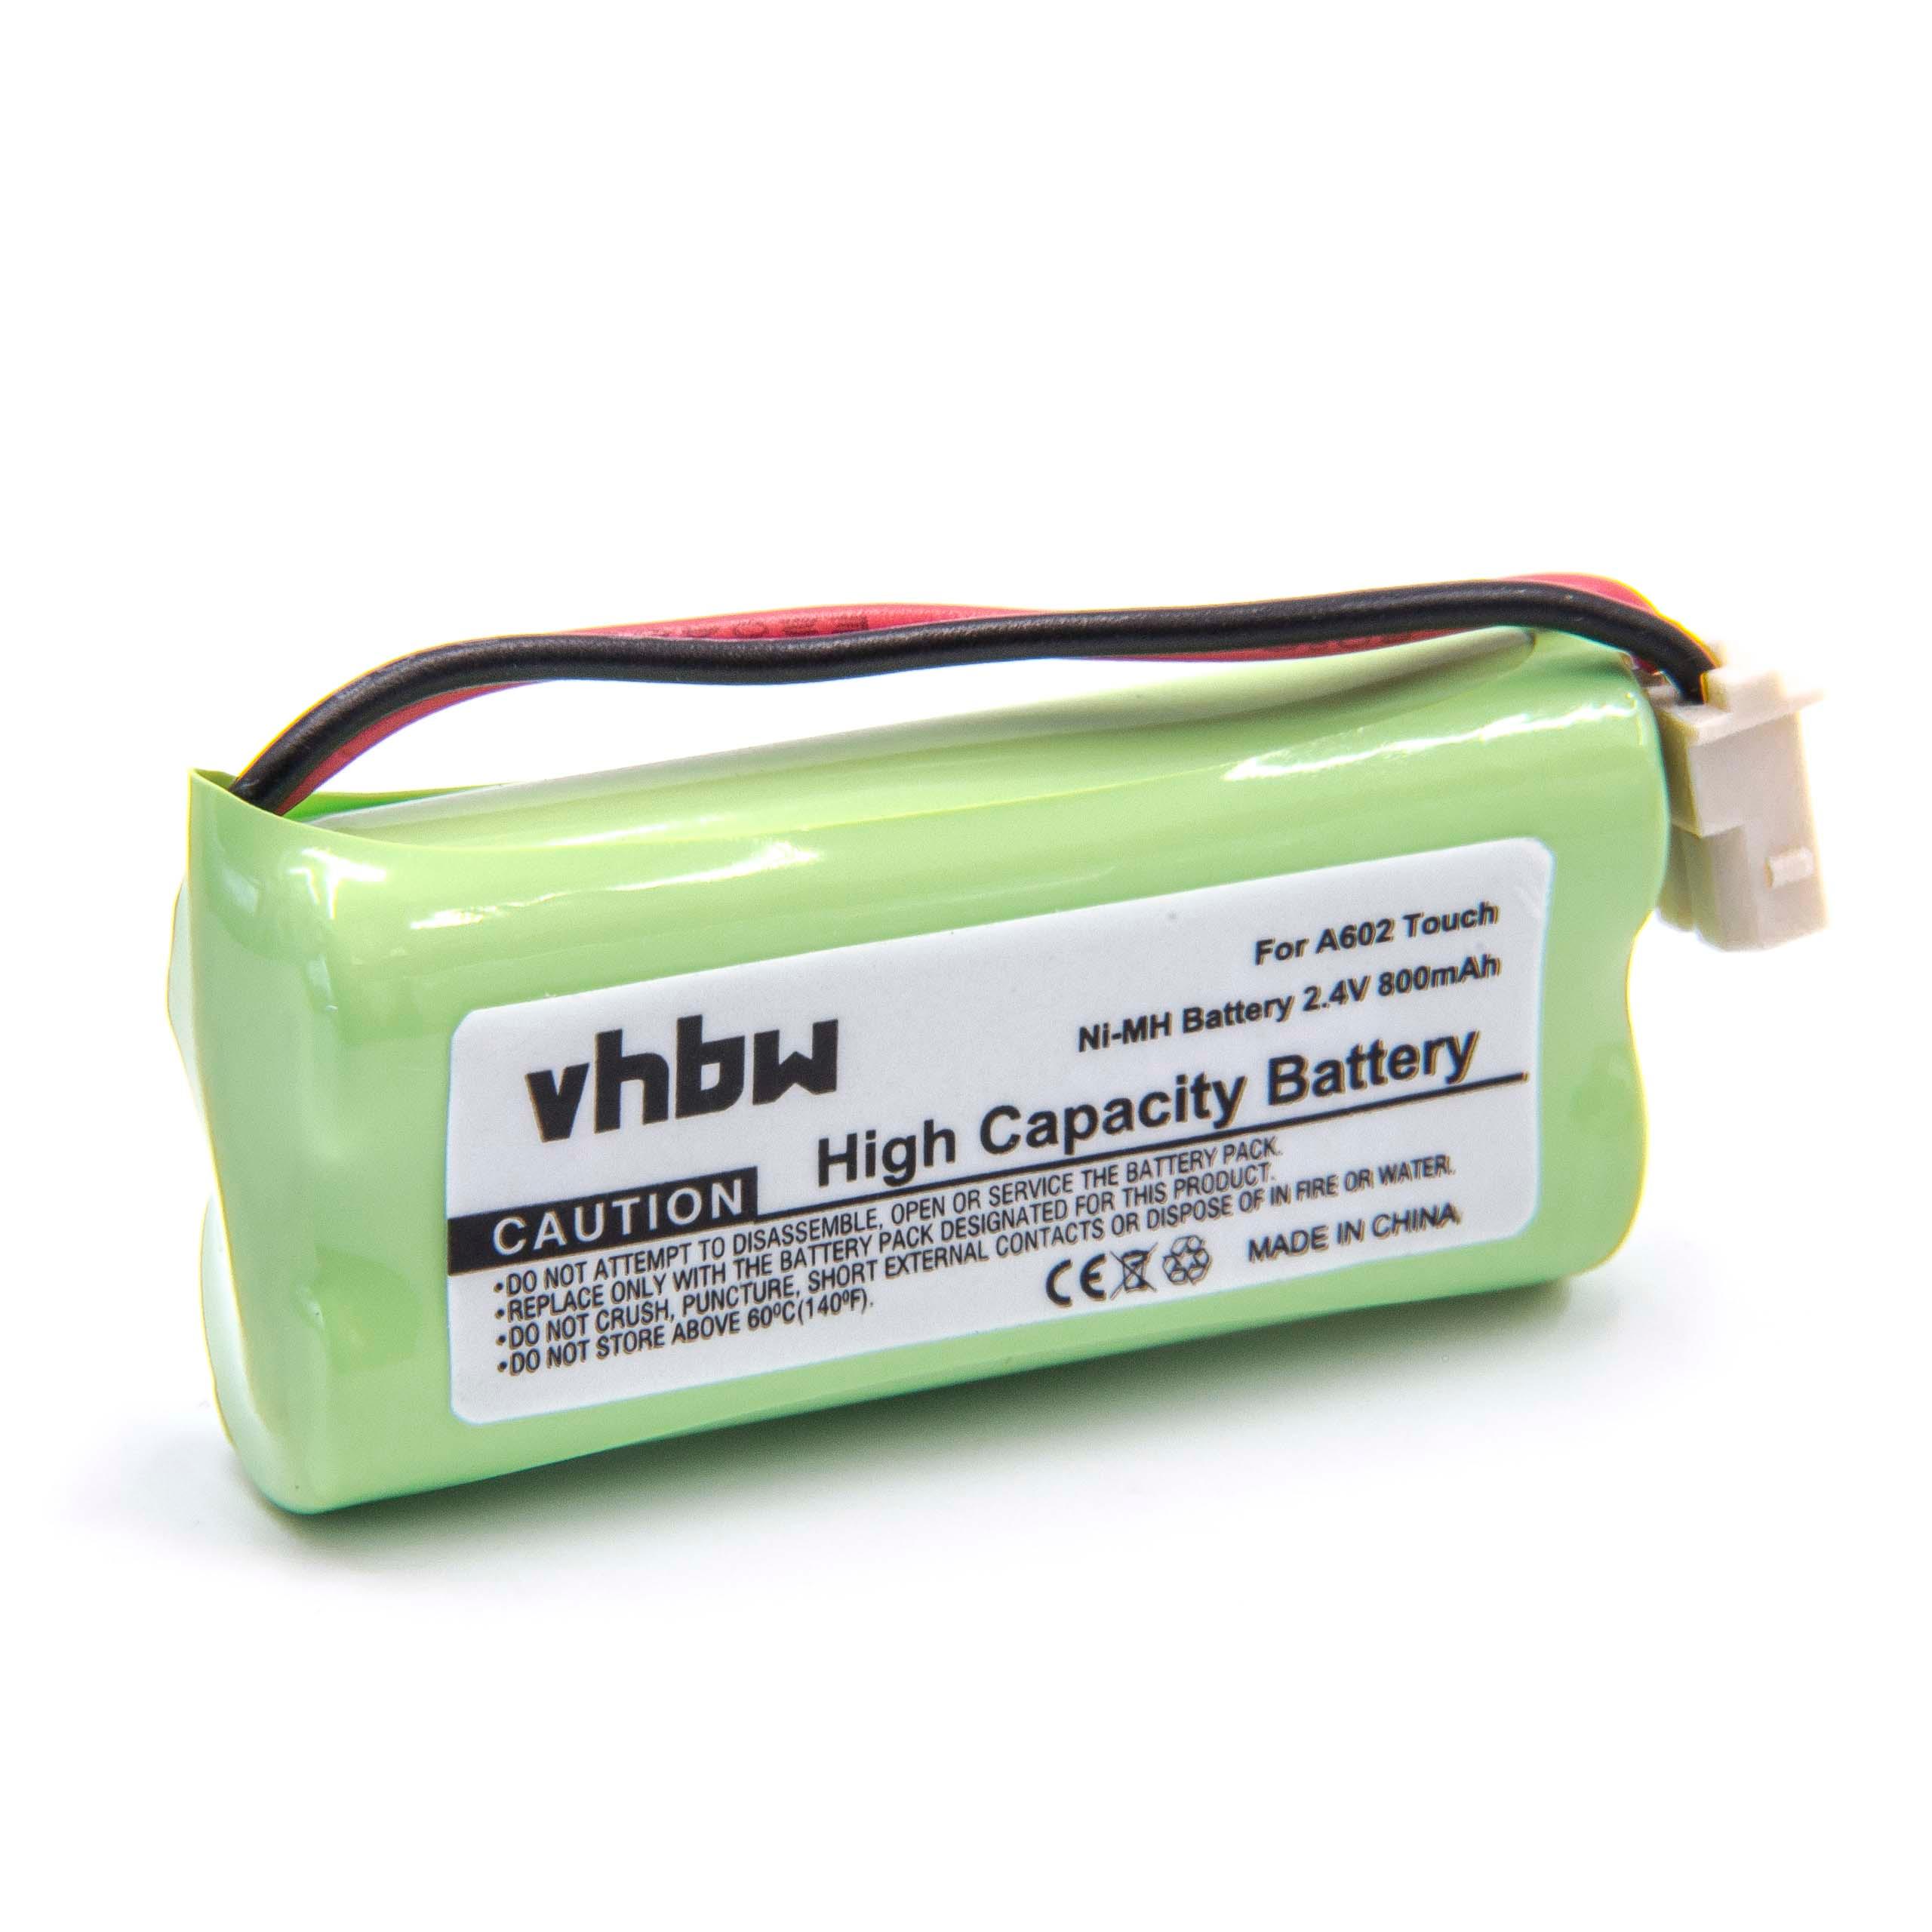 Baby Monitor Battery Replacement for V-Tech BT166342, 43AAA70PS2, BT266342 - 800mAh 2.4V NiMH